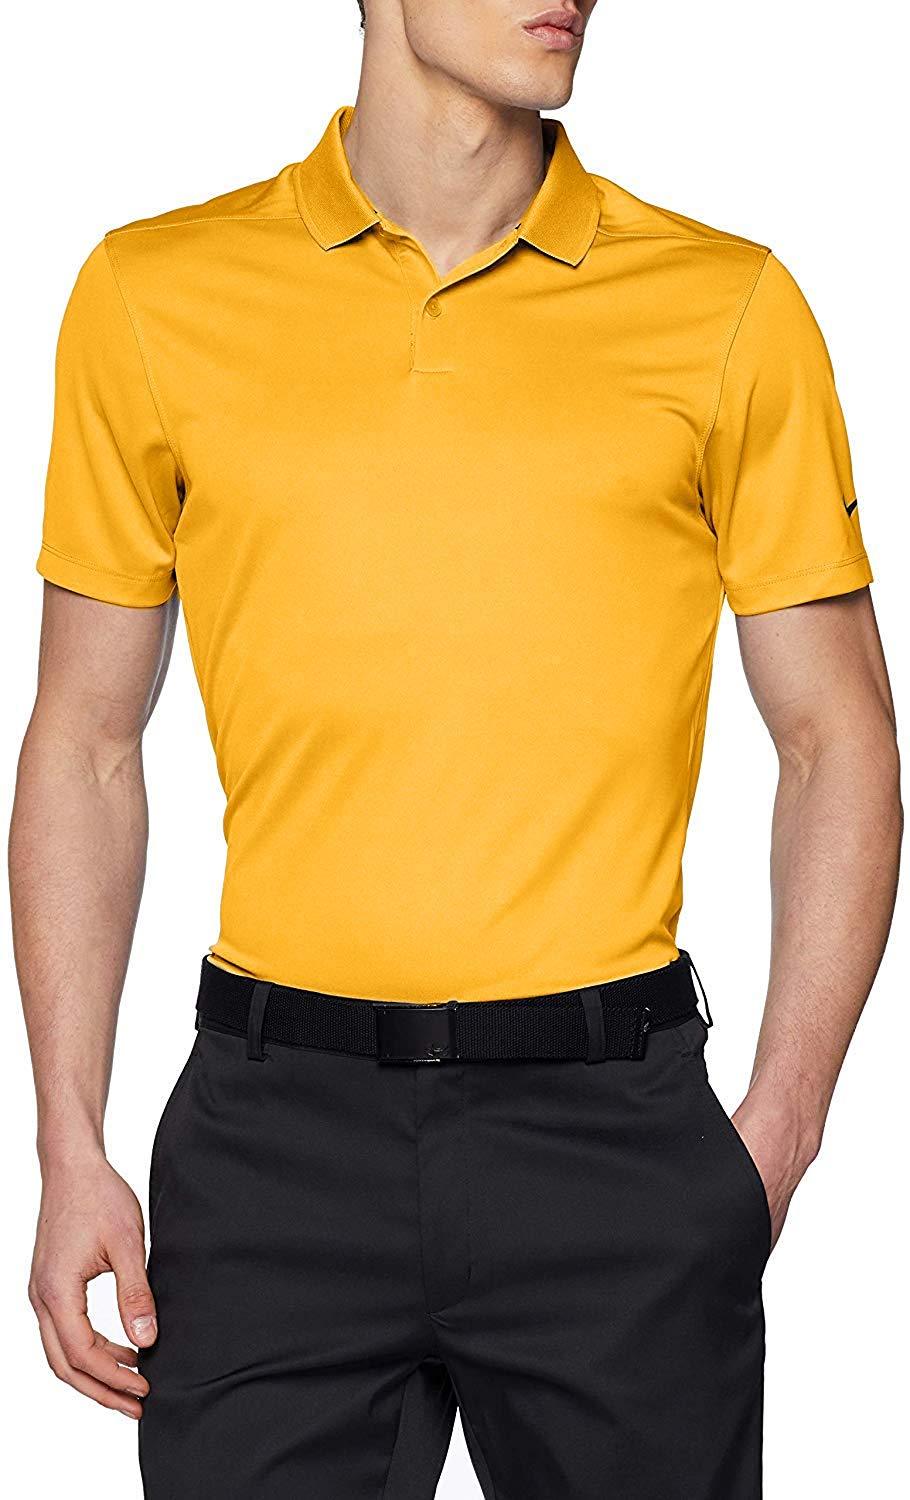 nike men's victory solid polo